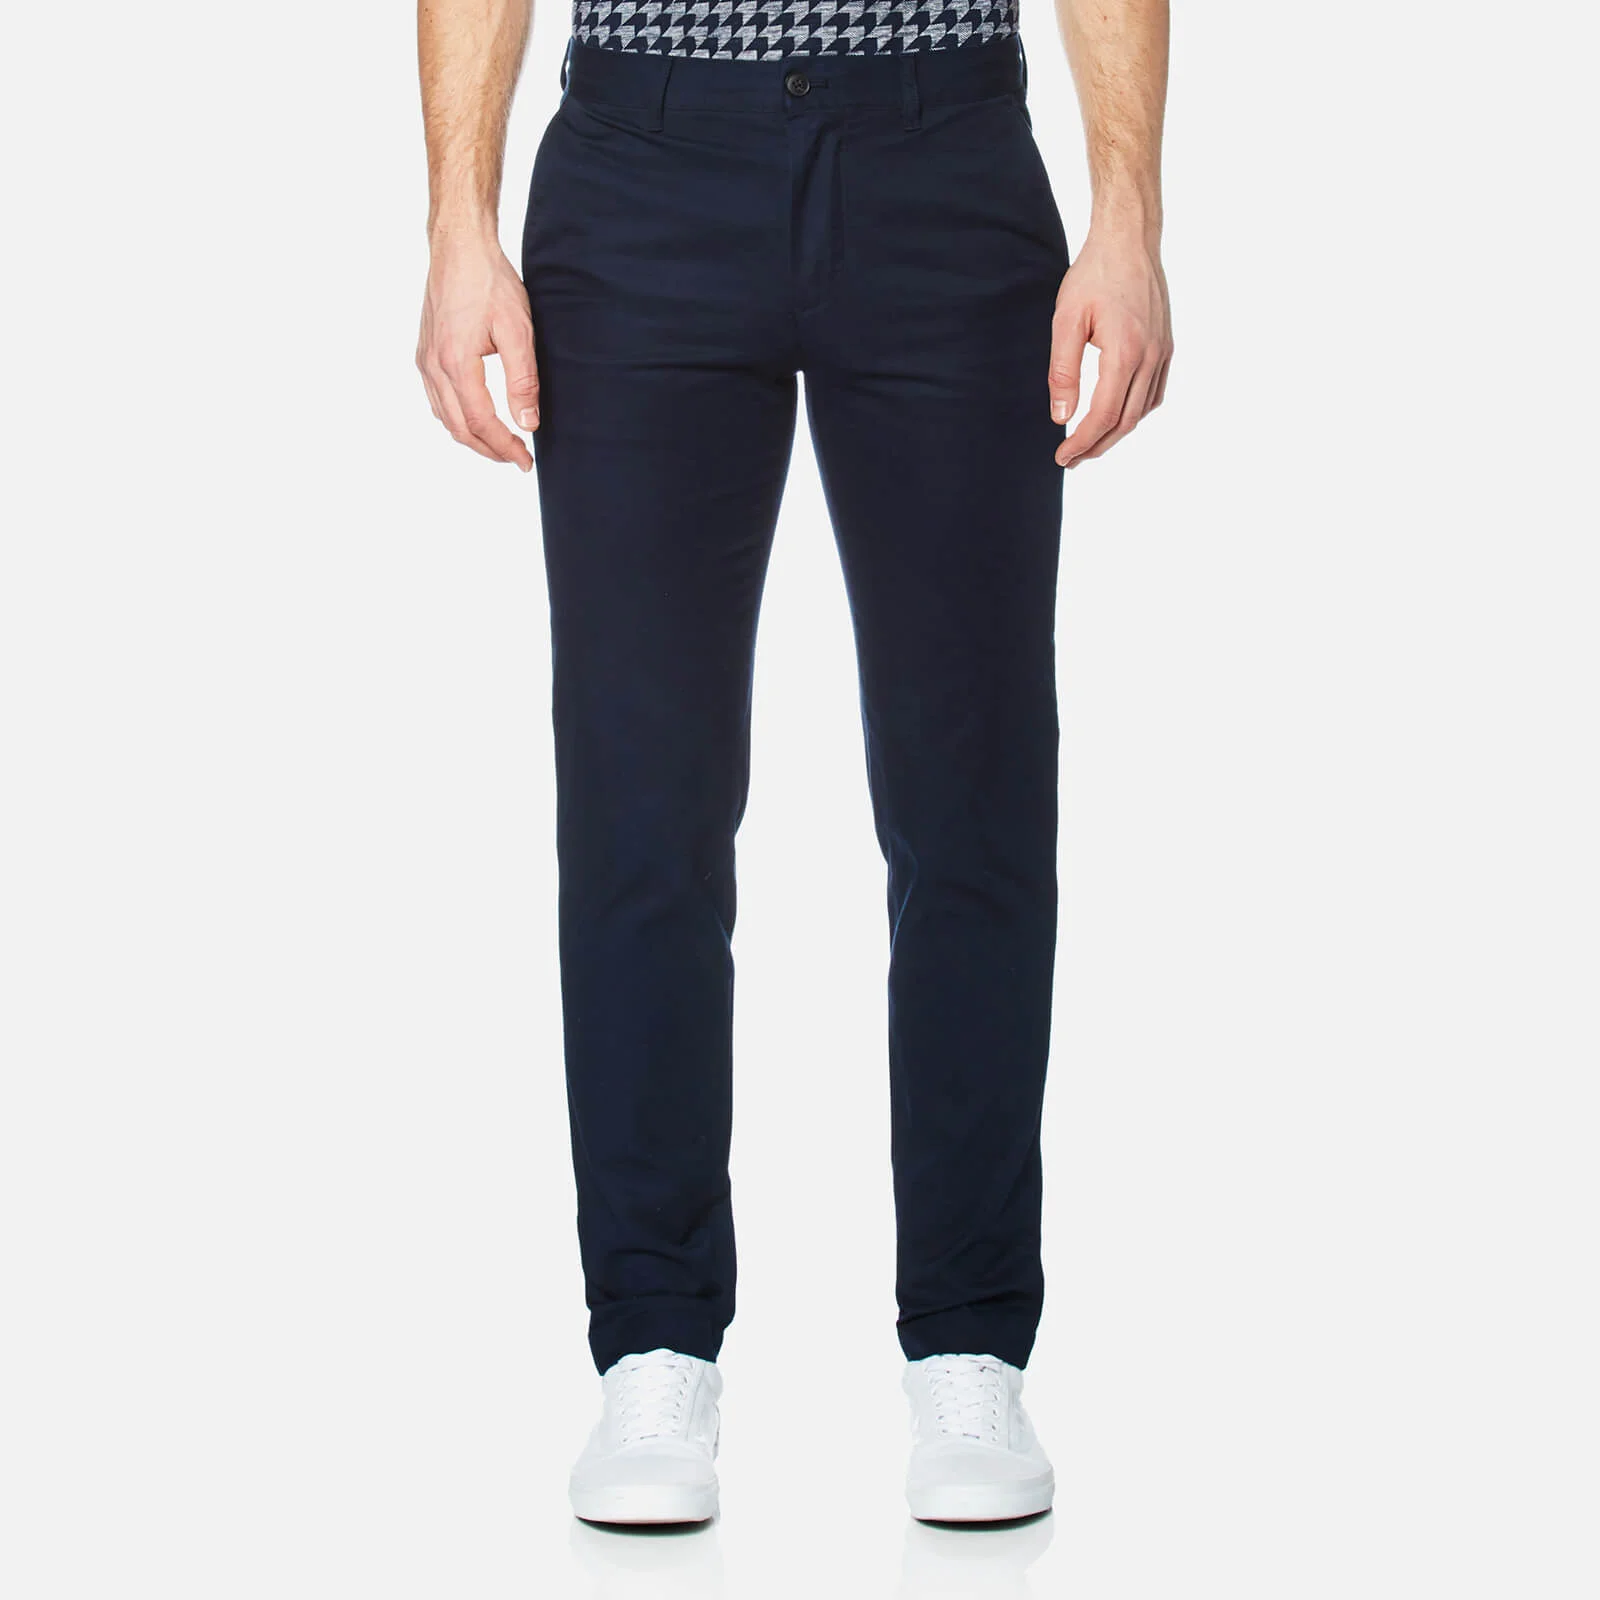 Lacoste Men's Slim Fit Chinos - Navy Image 1